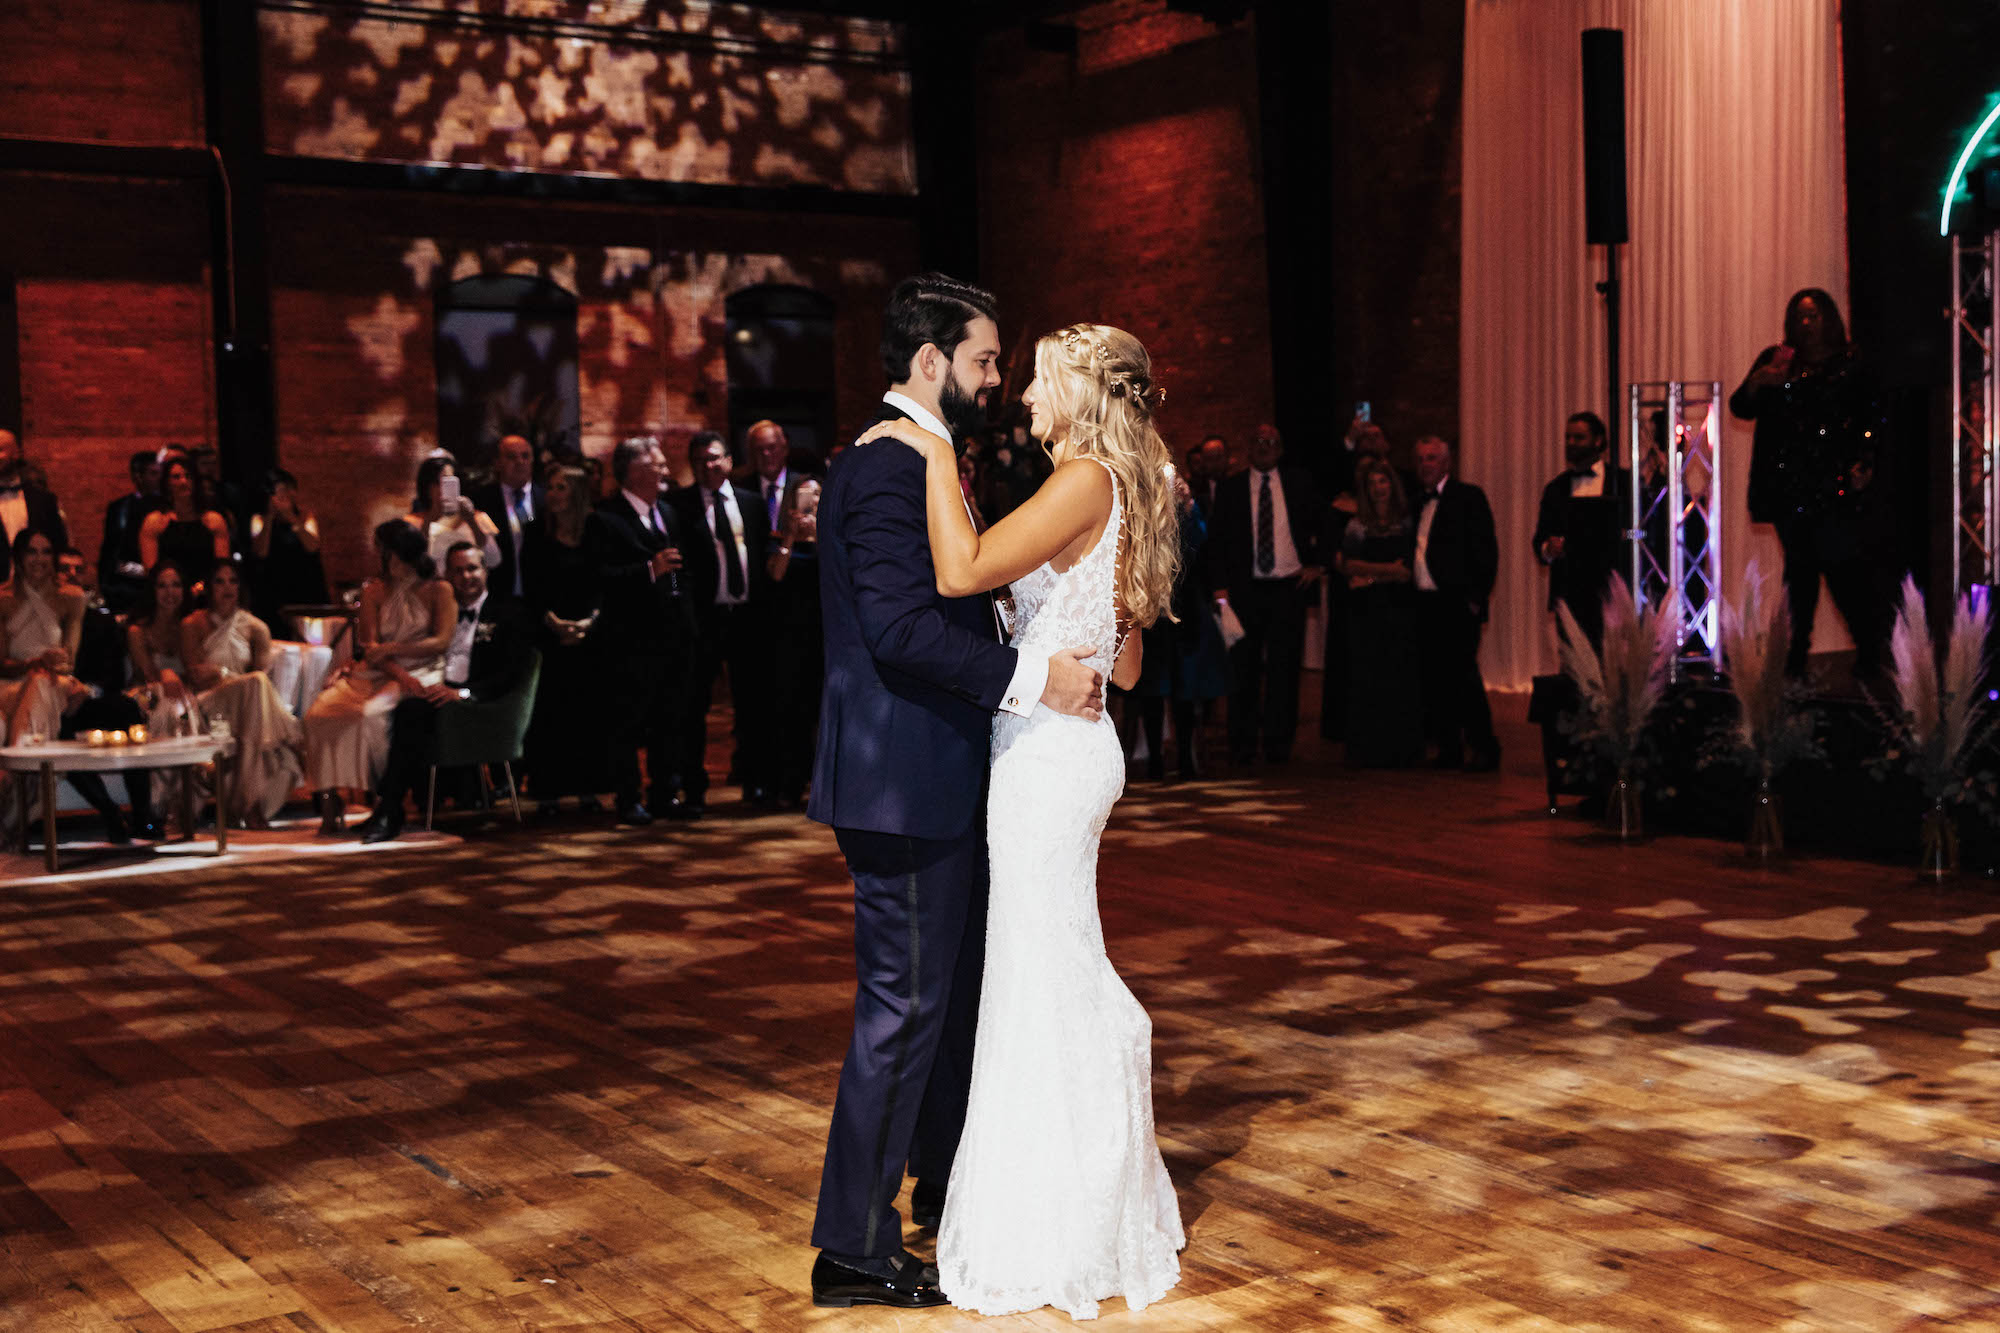 Bride and Groom First Dance | Tampa Bay Wedding Dance Lessons by Amanda